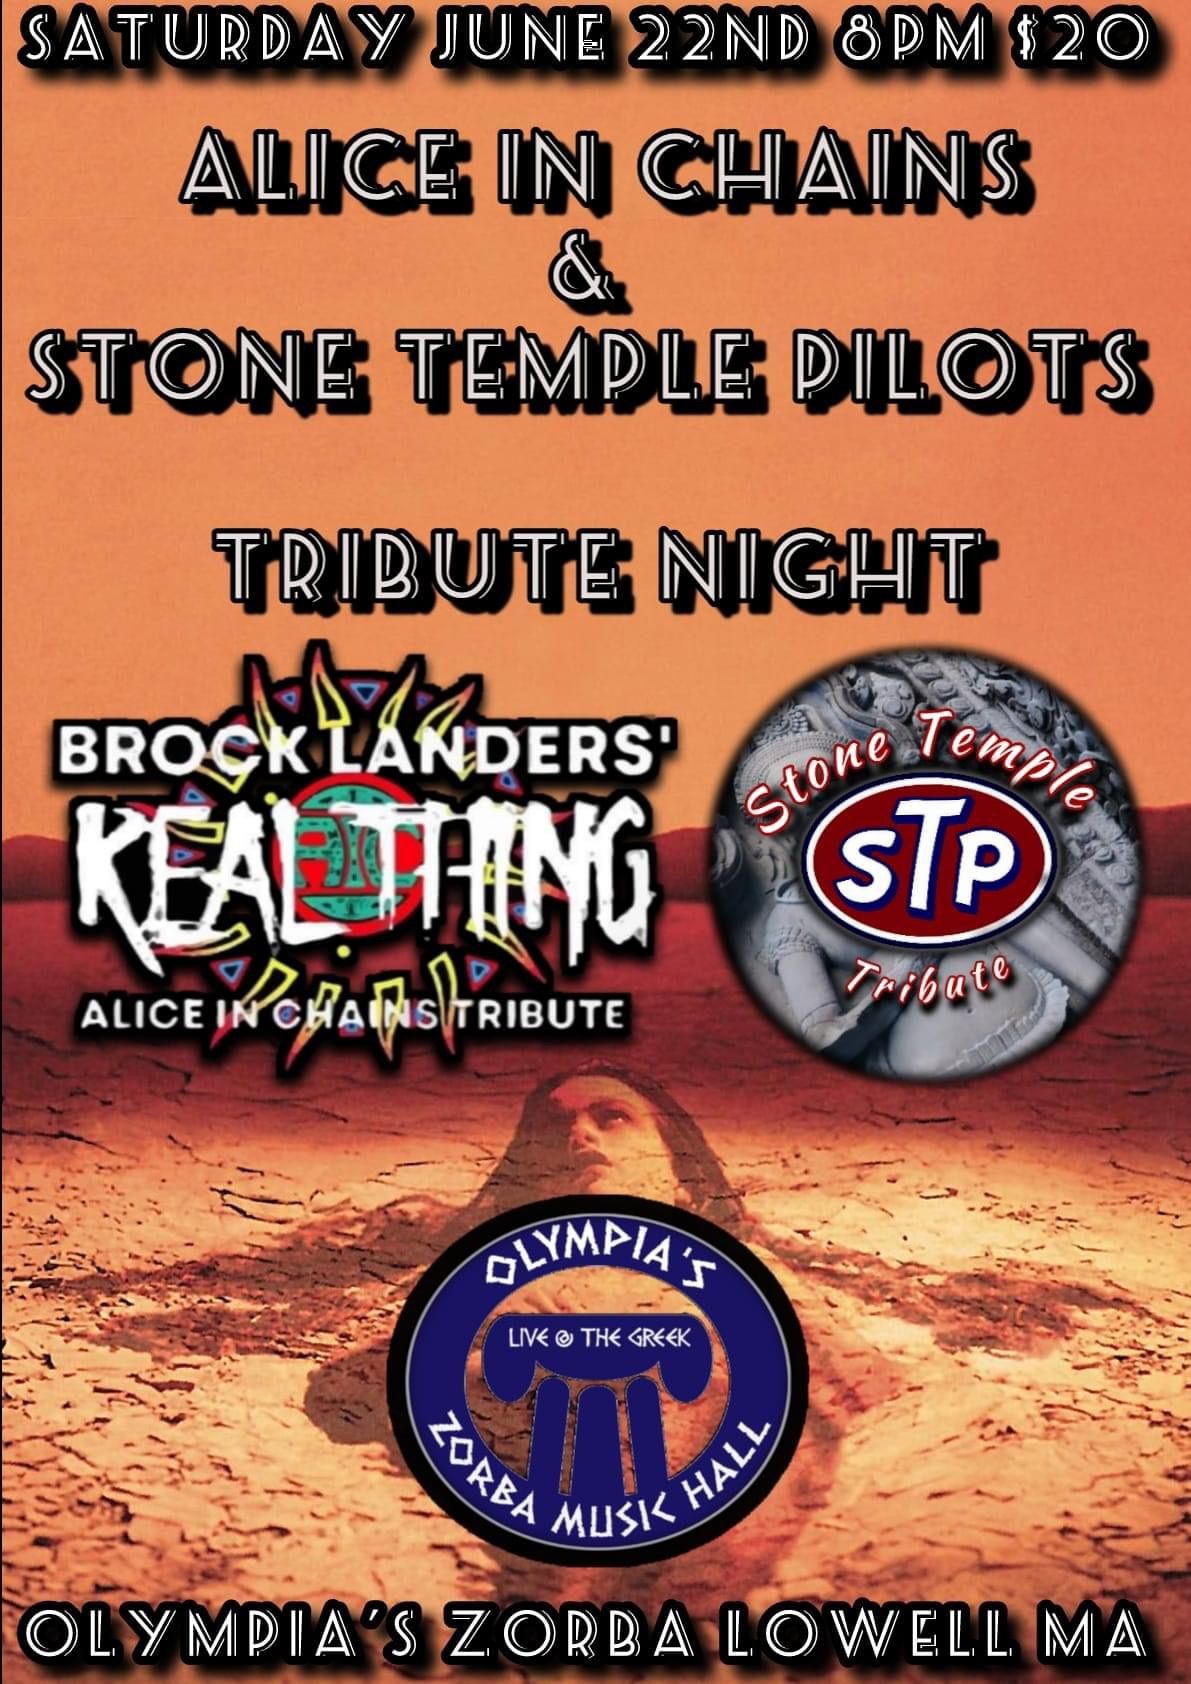 Alice in Chains & Stone Temple Pilots Tribute Night